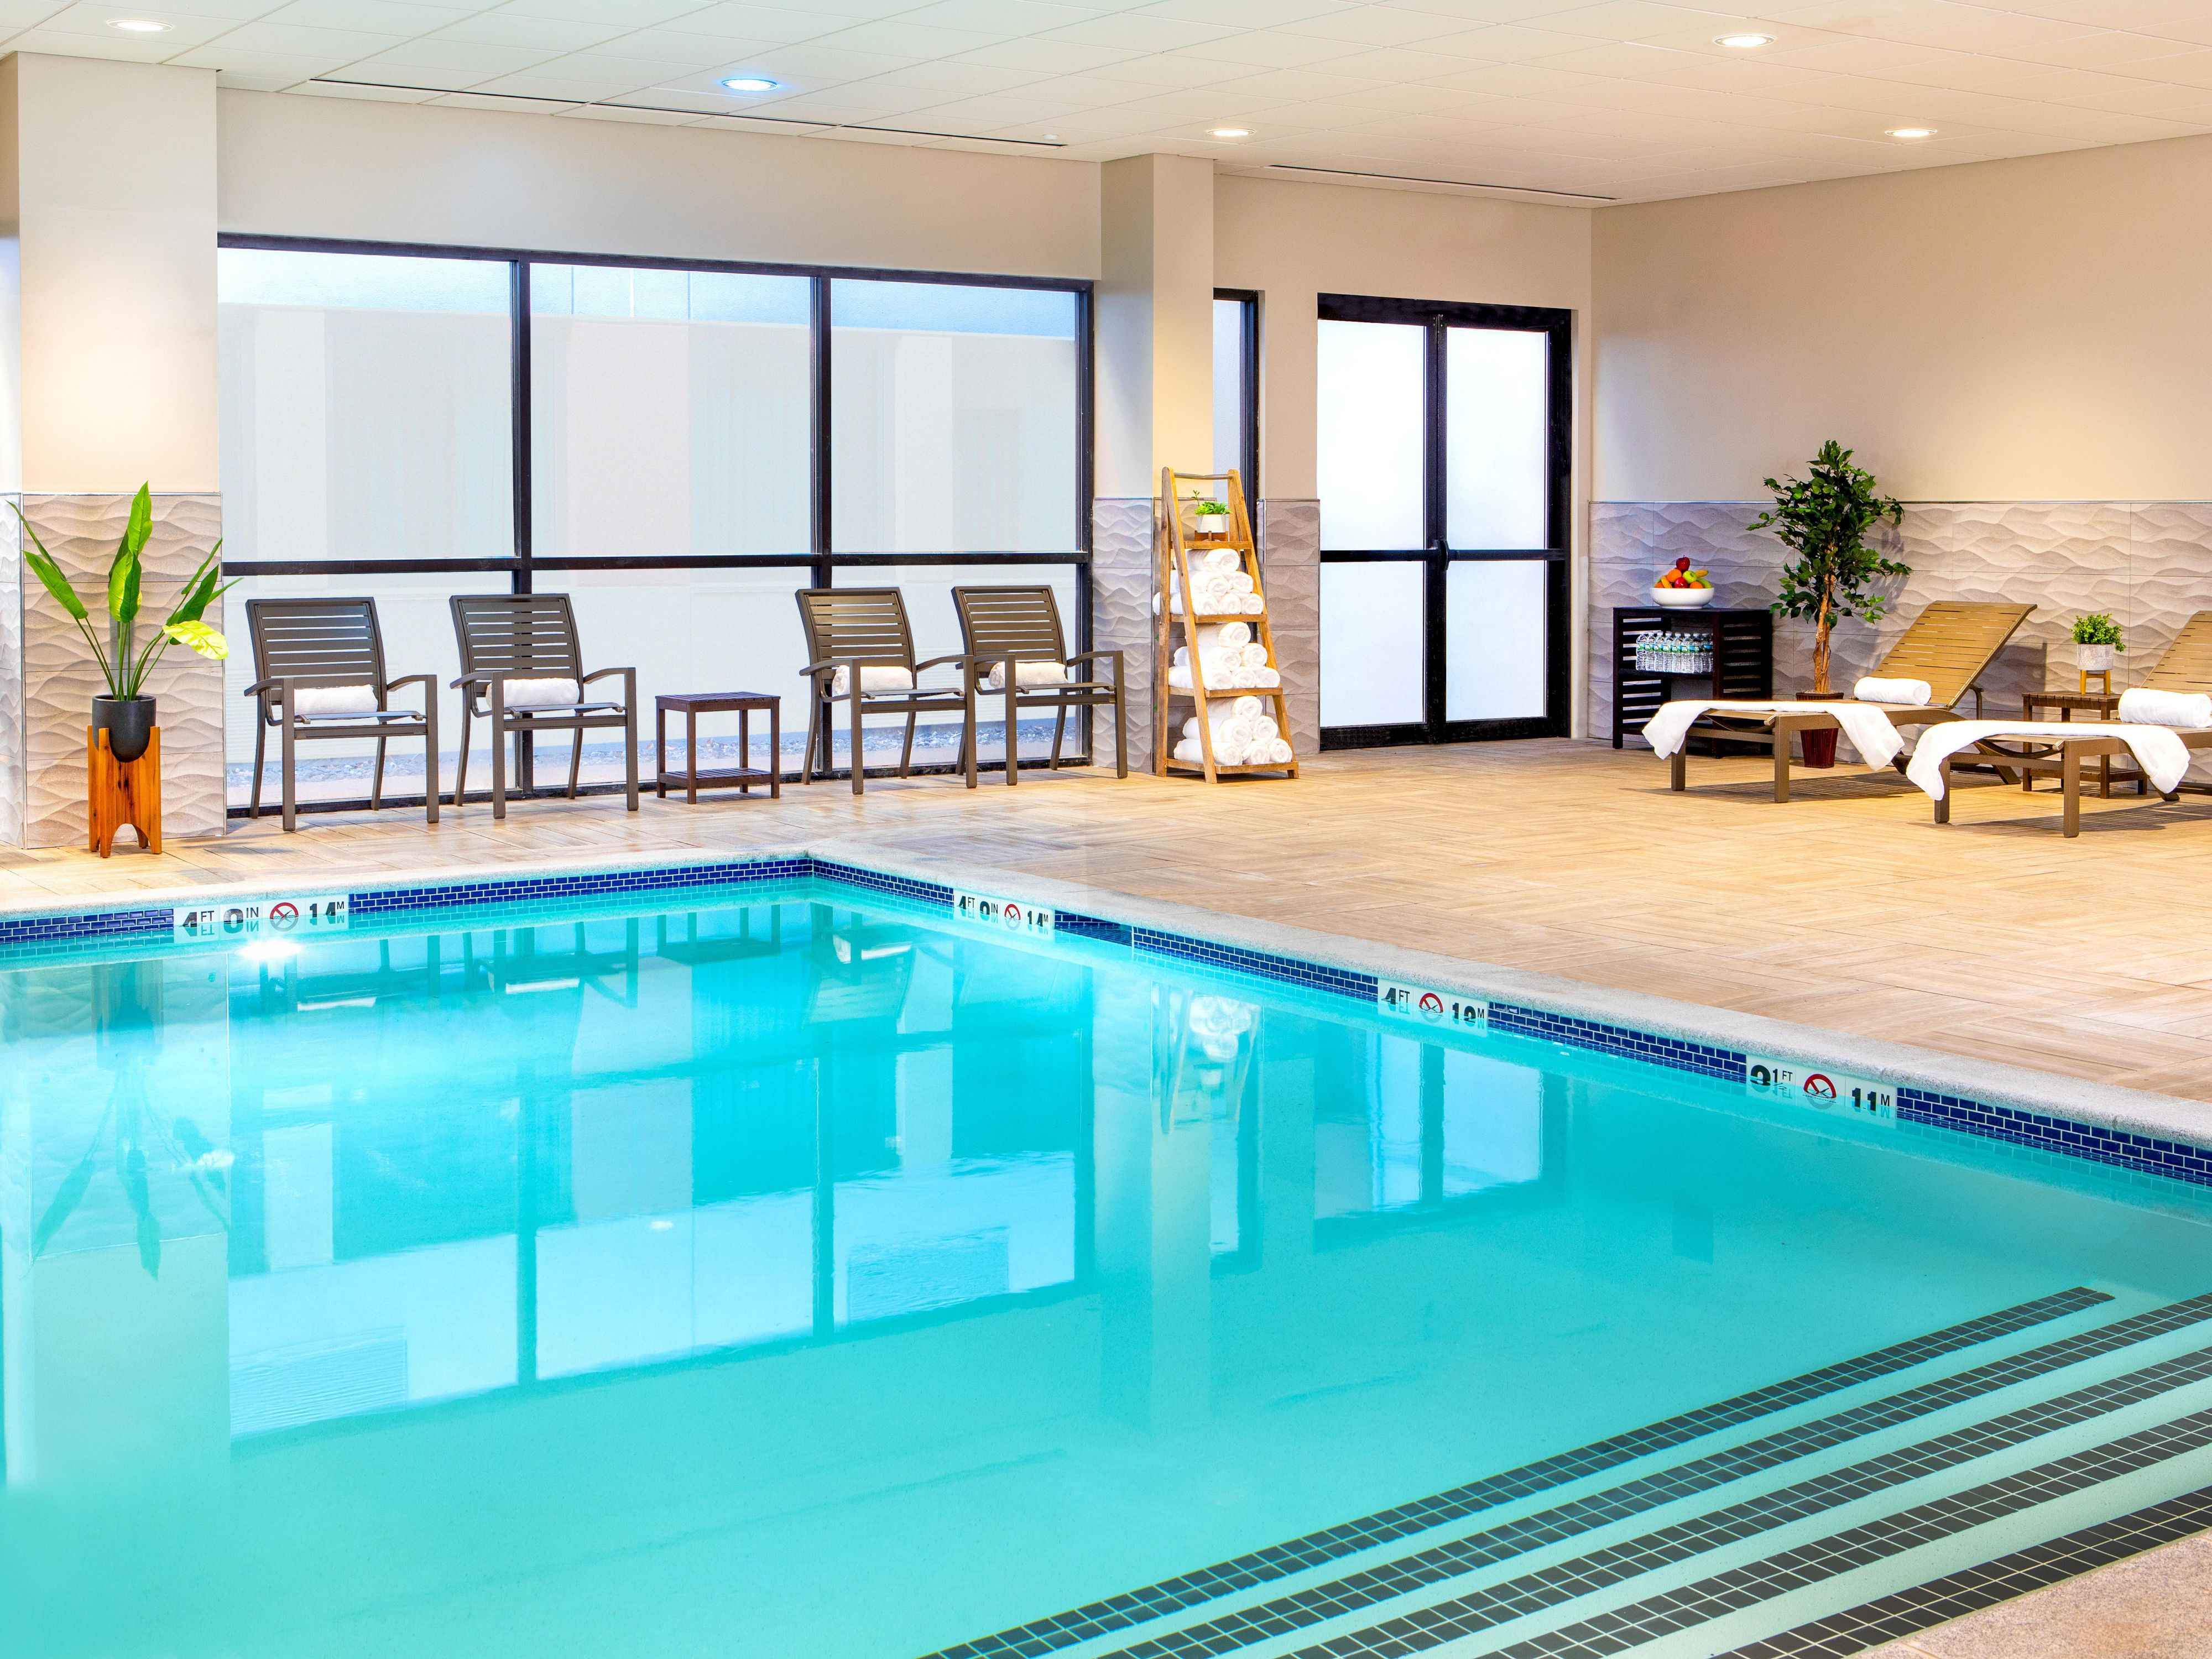 The indoor Saline Salt Filtration Heated pool is open daily and the perfect place to relax after a long day at work or out exploring in Boston. Currently, to ensure the health and safety of guests and staff, pool time must be reserved in person at the front desk.